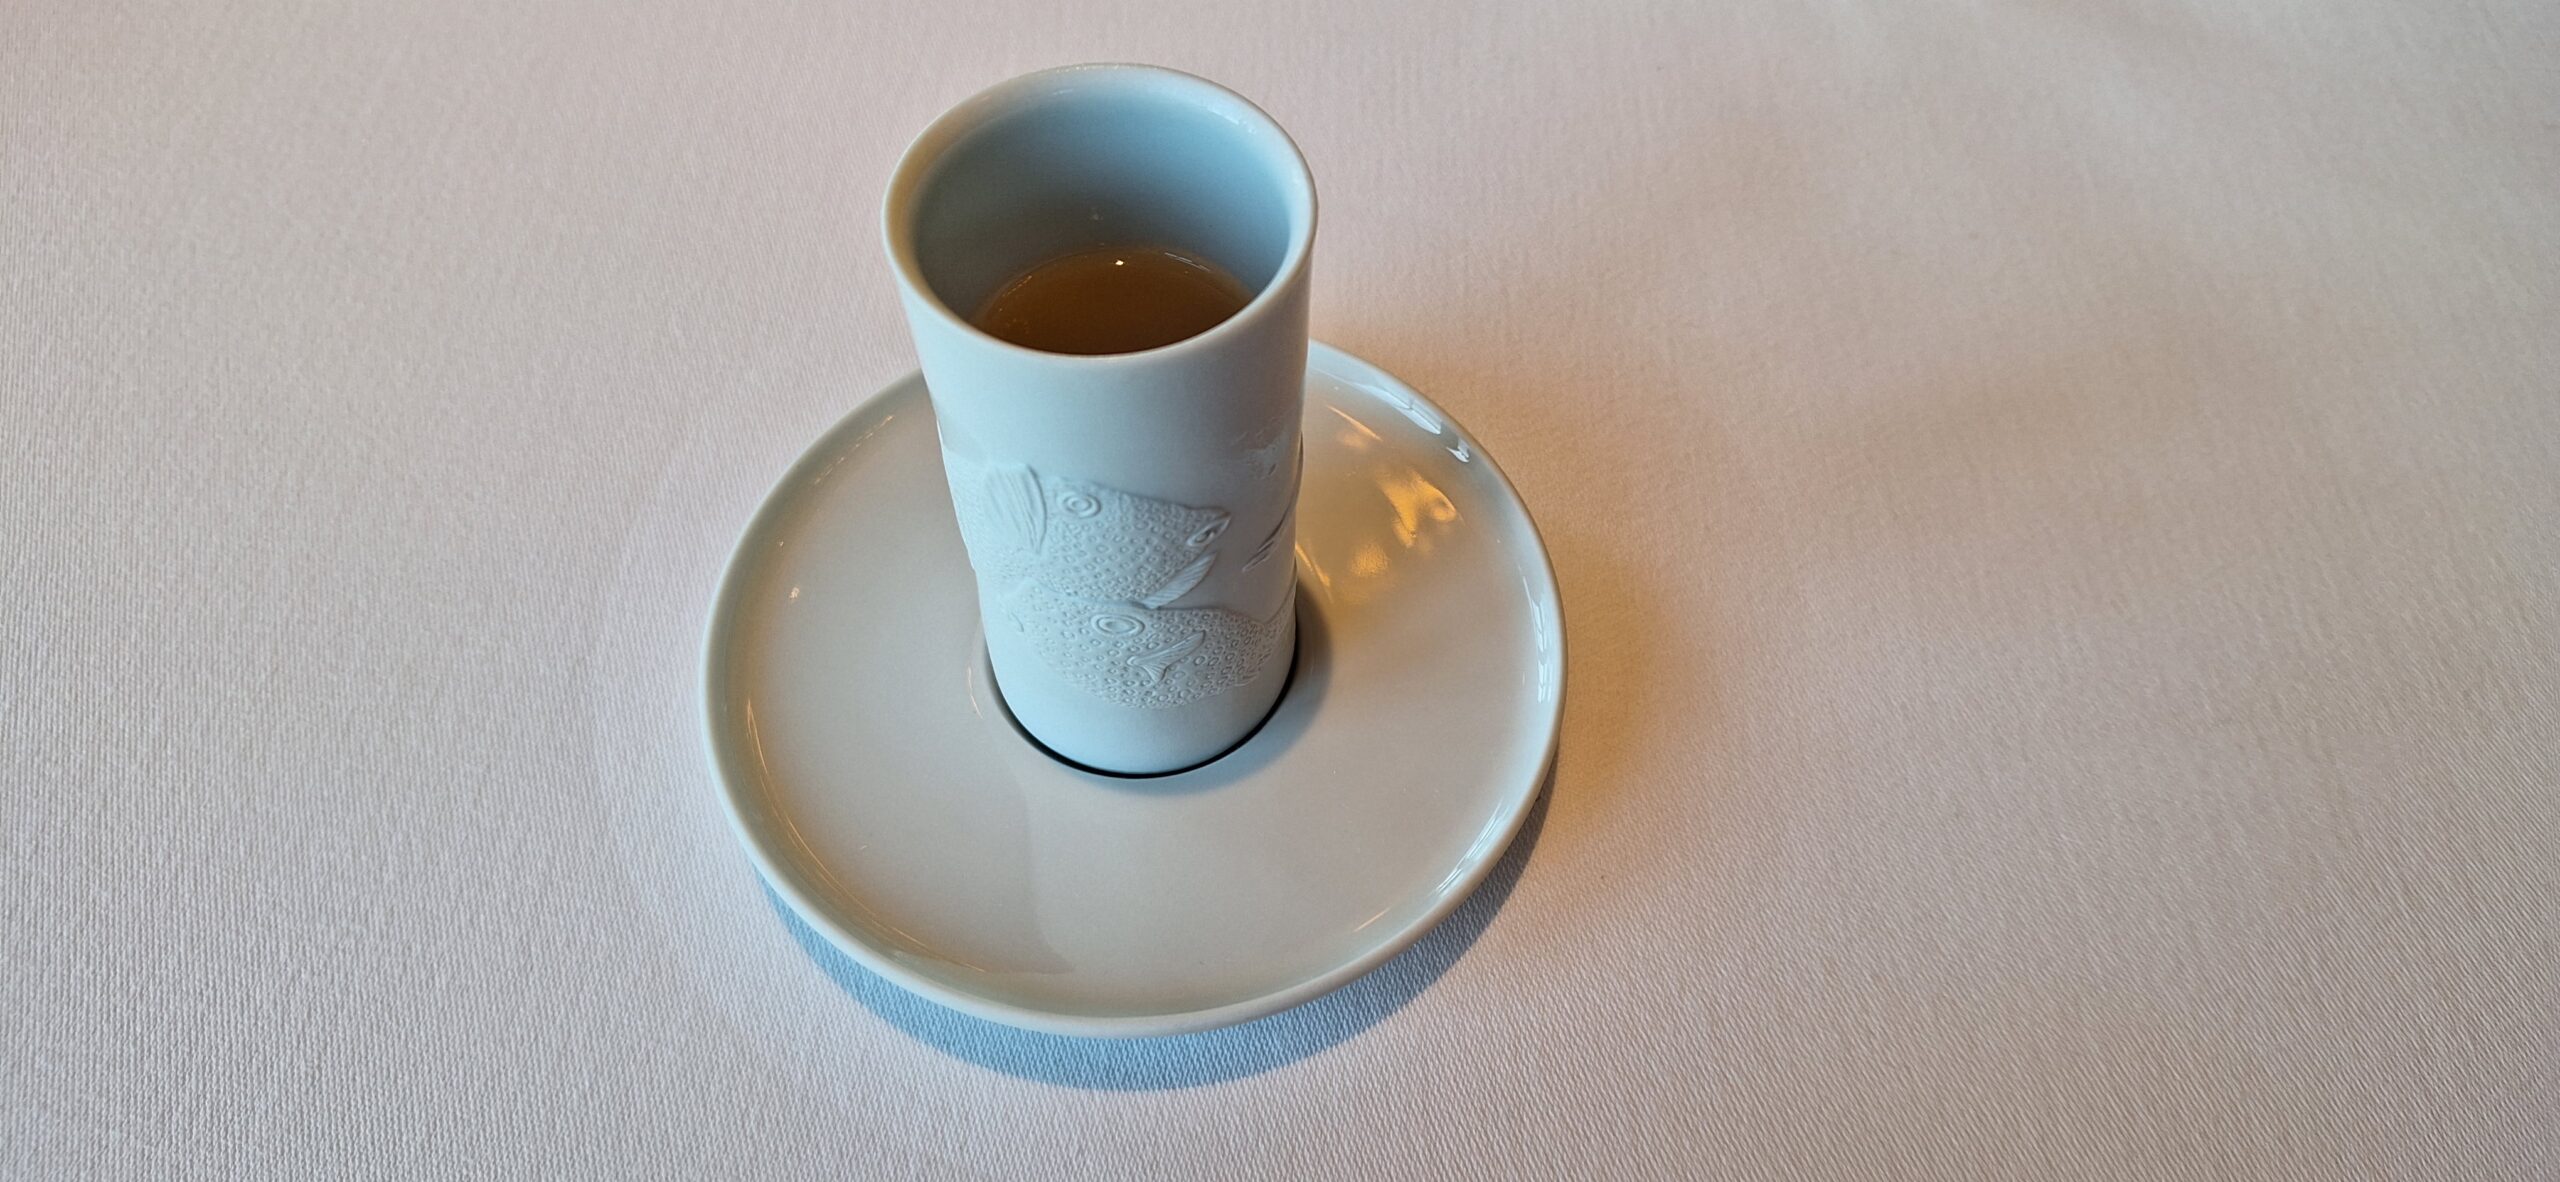 a white cup with a fish design on it